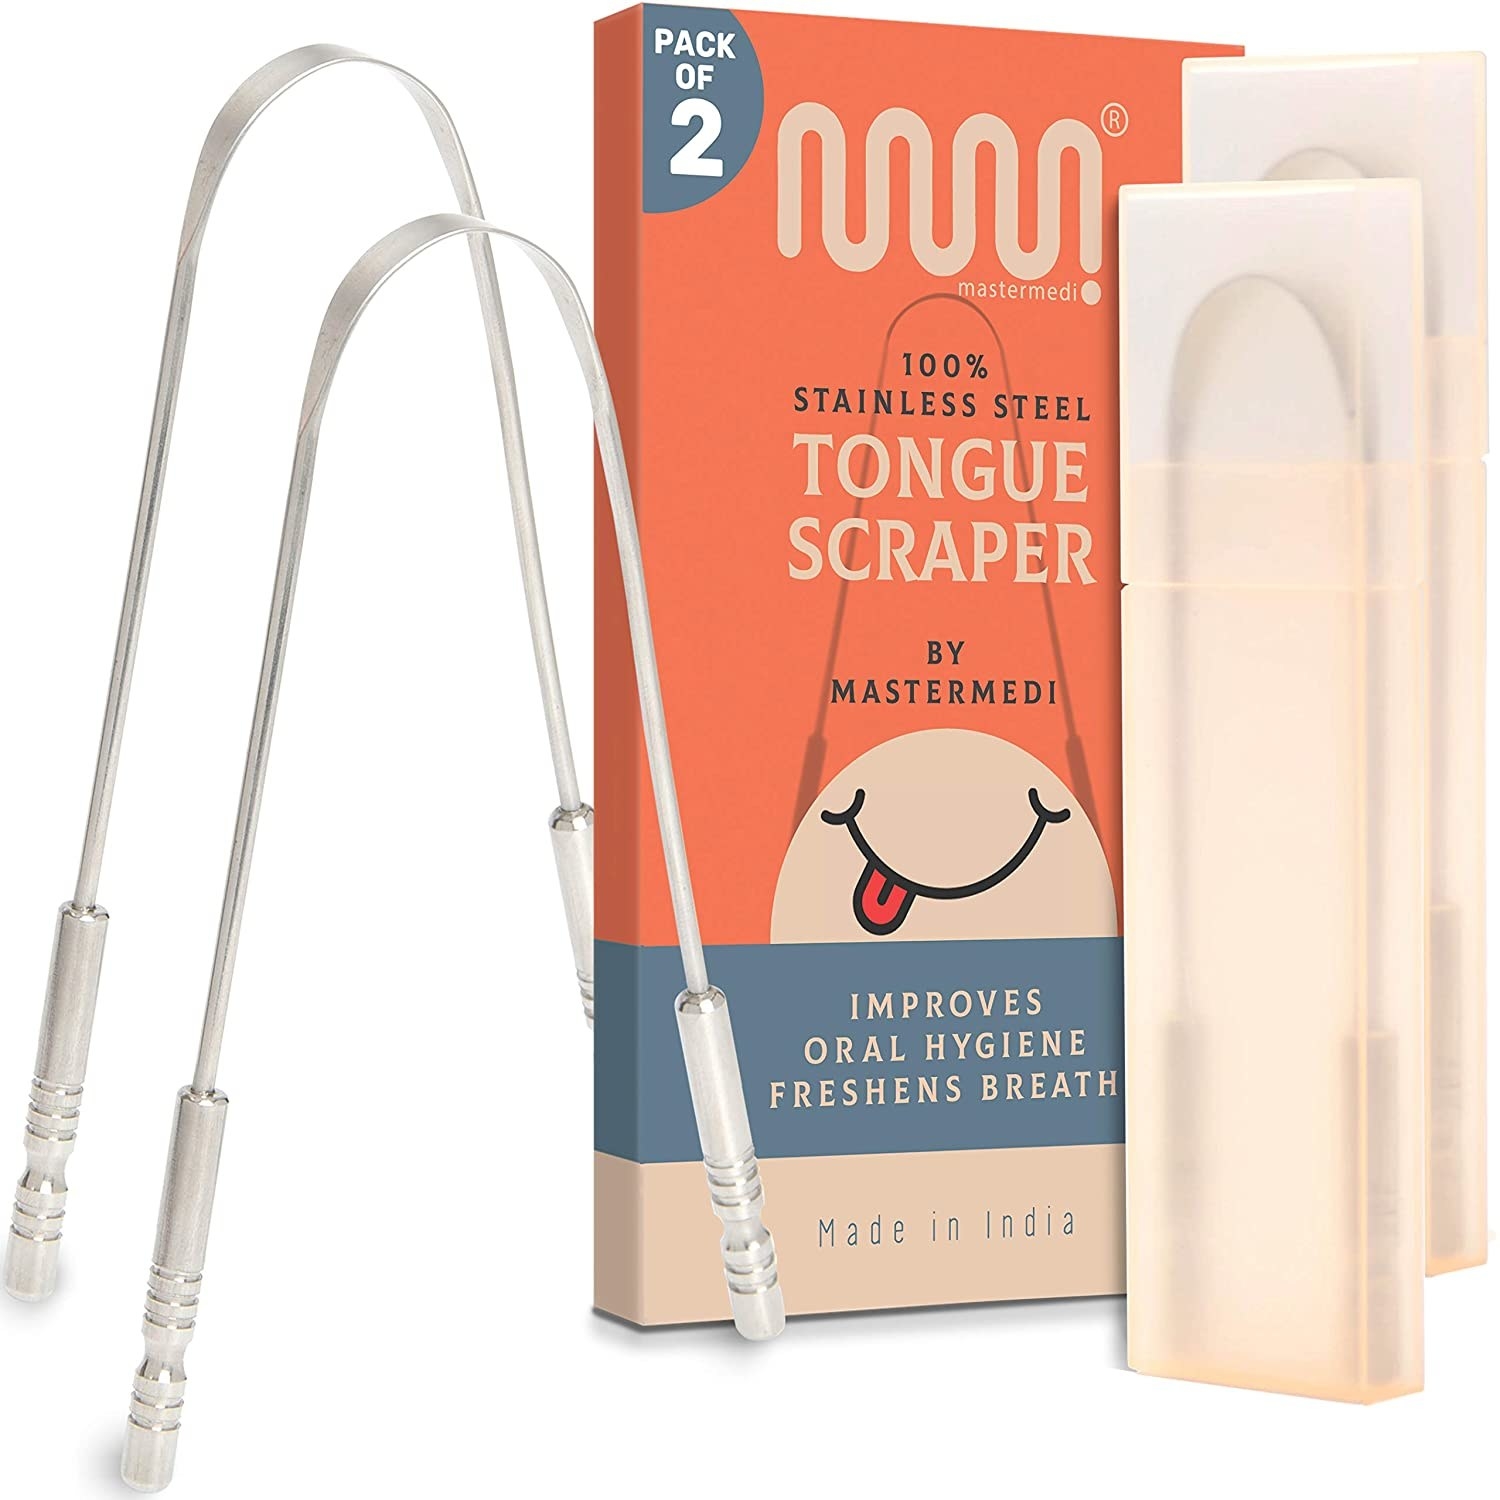 Two tongue scrapers